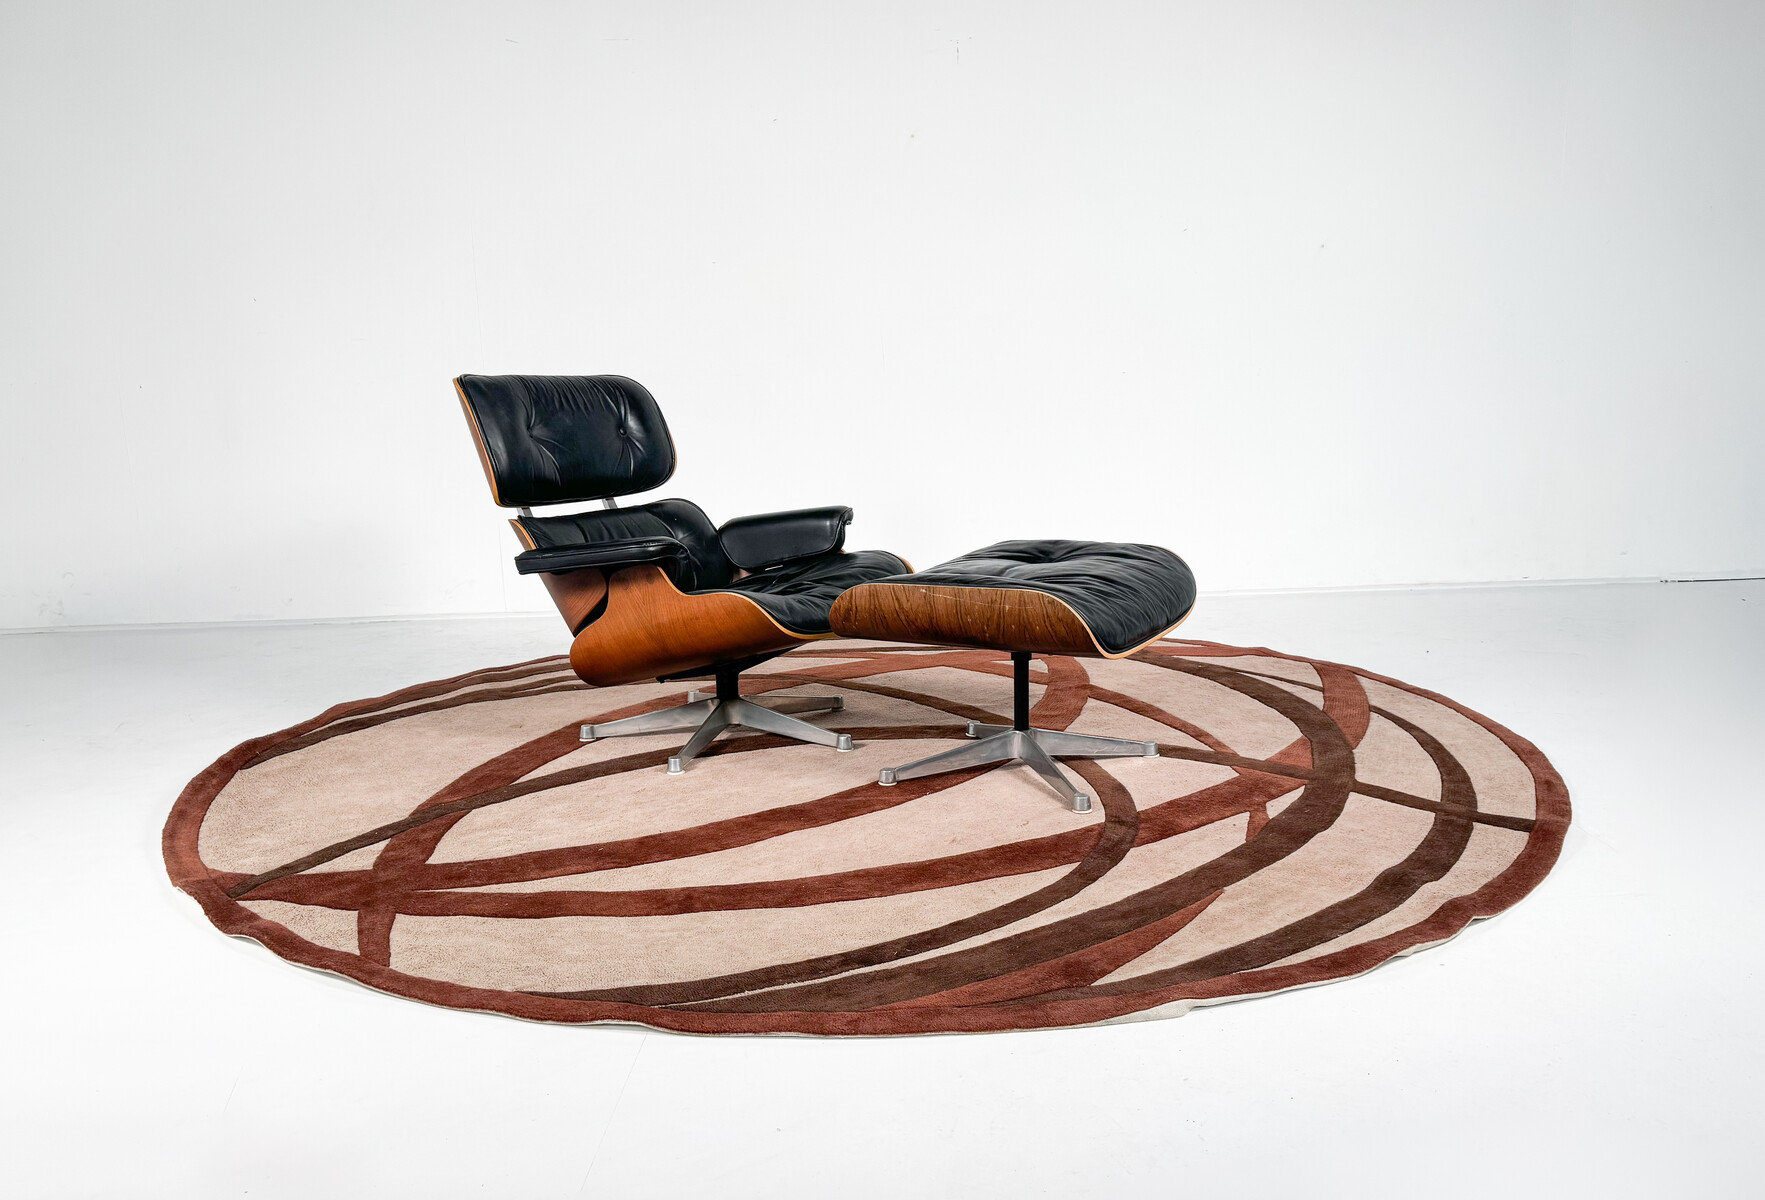 Round Abstract Rug, 1970s